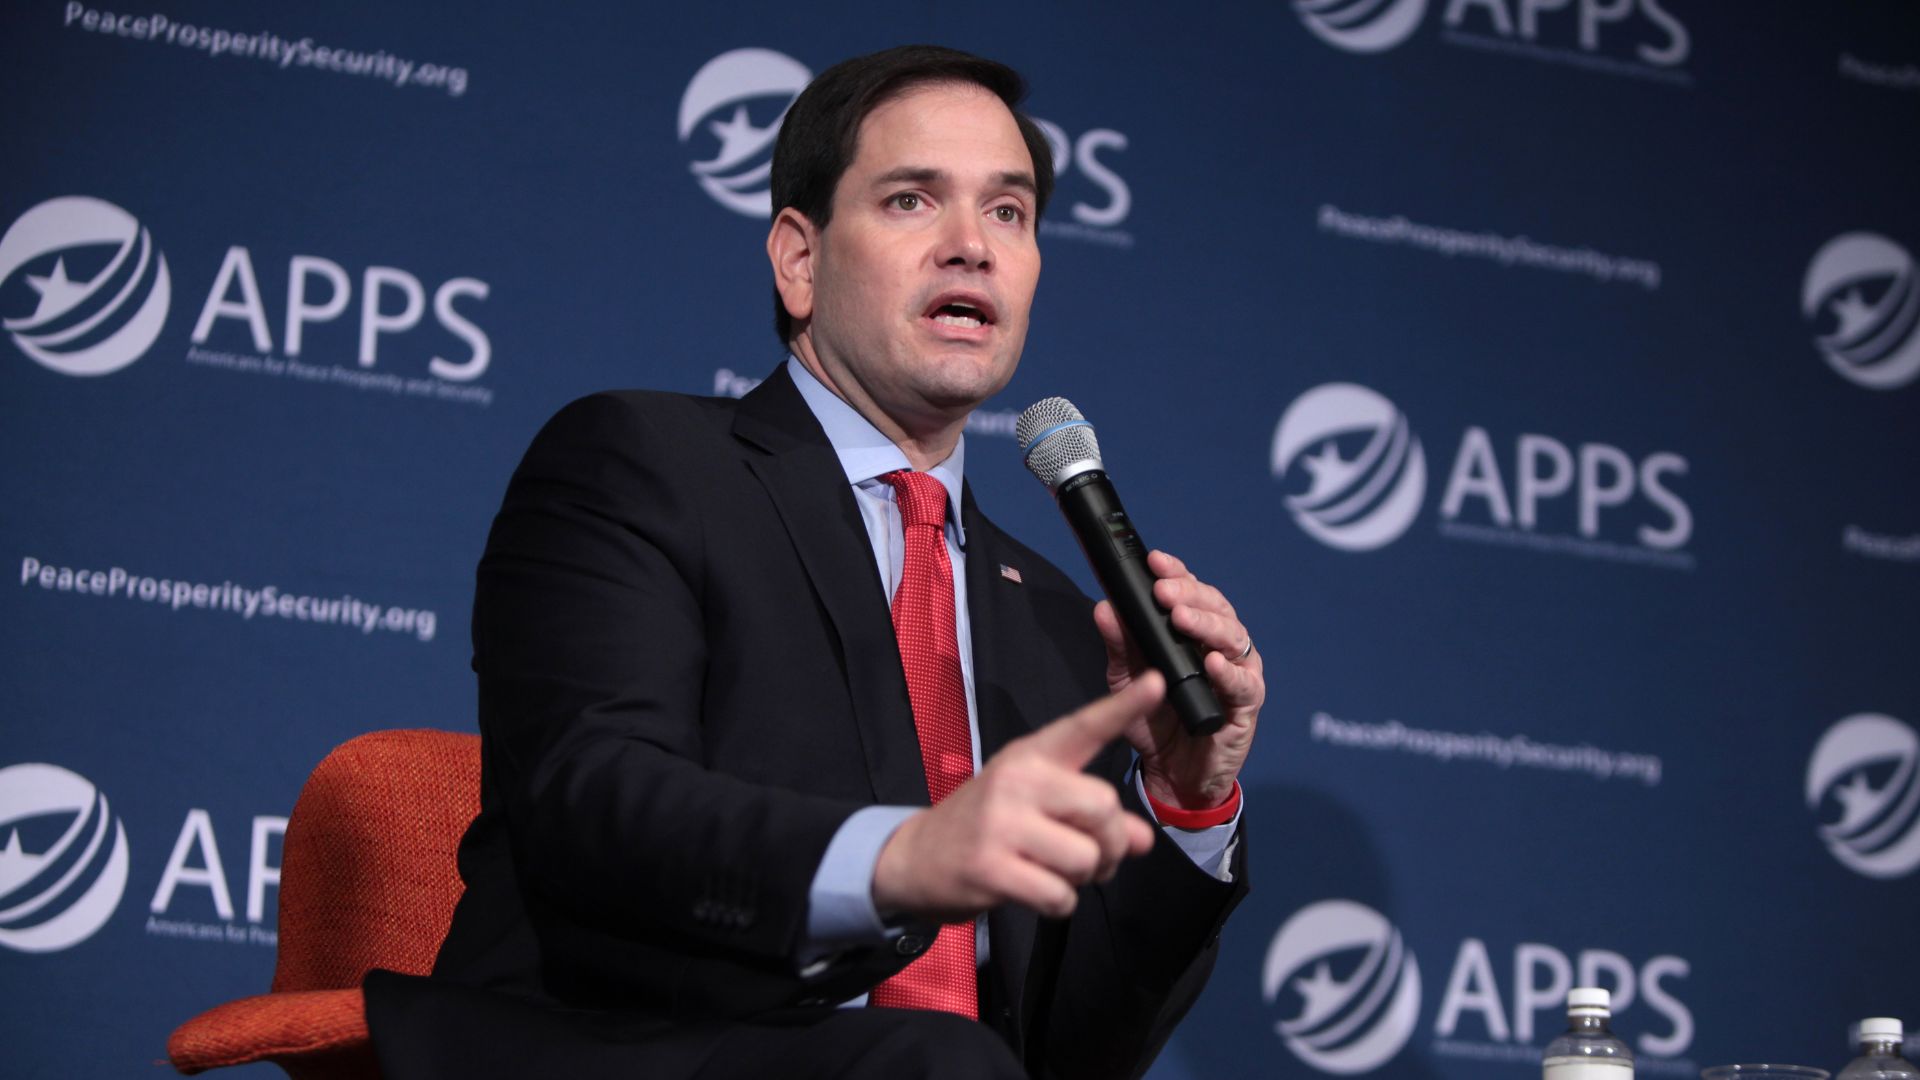 <p>This outrage led to many Florida Republican lawmakers sending a letter to DHS Secretary Alejandro Mayorkas, as well as TSA Administrator David Pekoske.   </p> <p>Gimenez led this letter, while Senators Marco Rubio and Rick Scott were also included. Representatives Mario Diaz-Balart and Maria Elvira Salazar also signed it. </p>